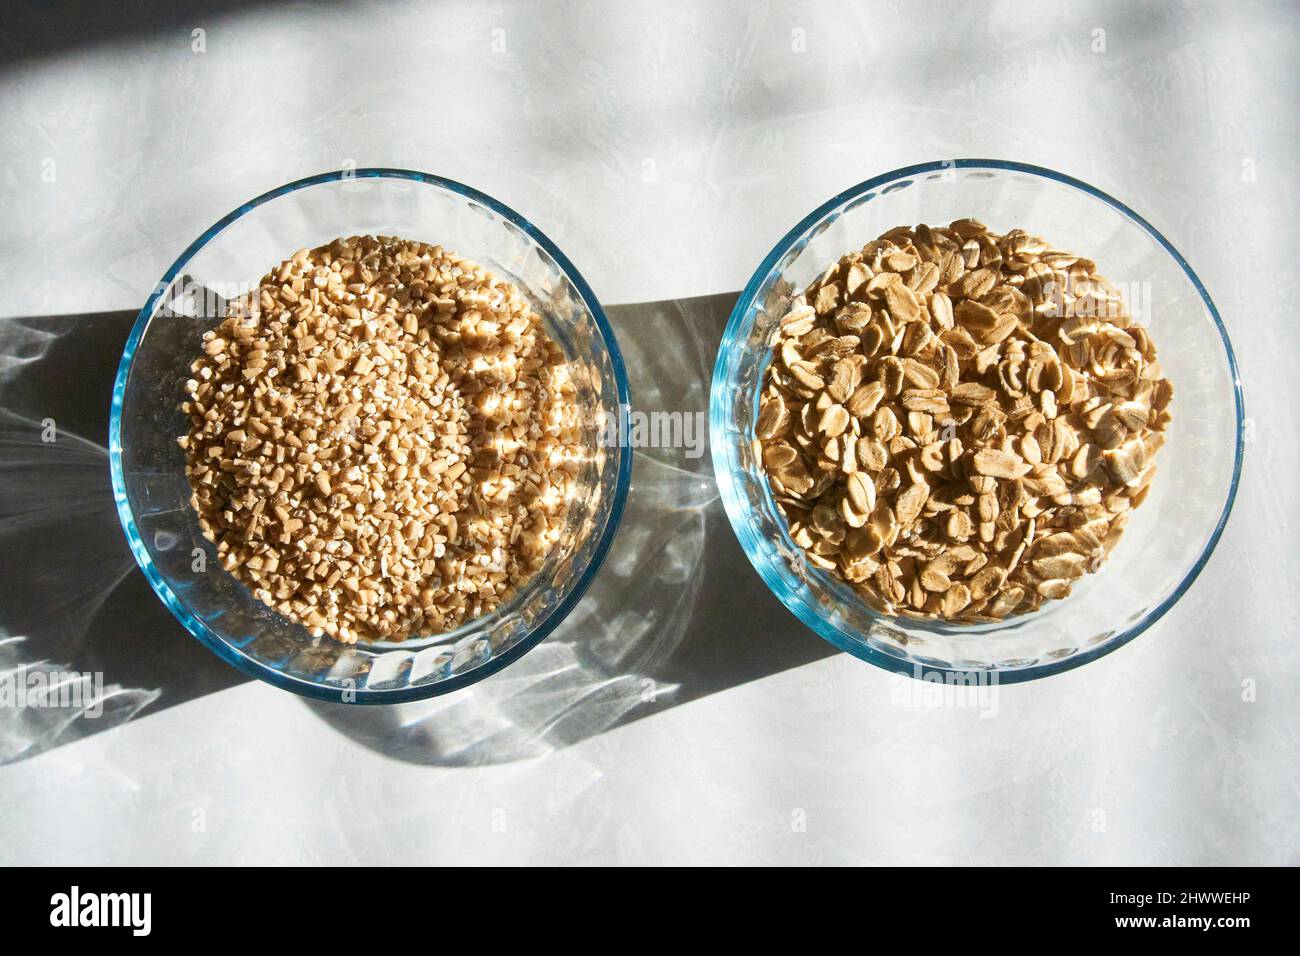 Two glass bowls of whole grain oats and steel cut oats. Stock Photo